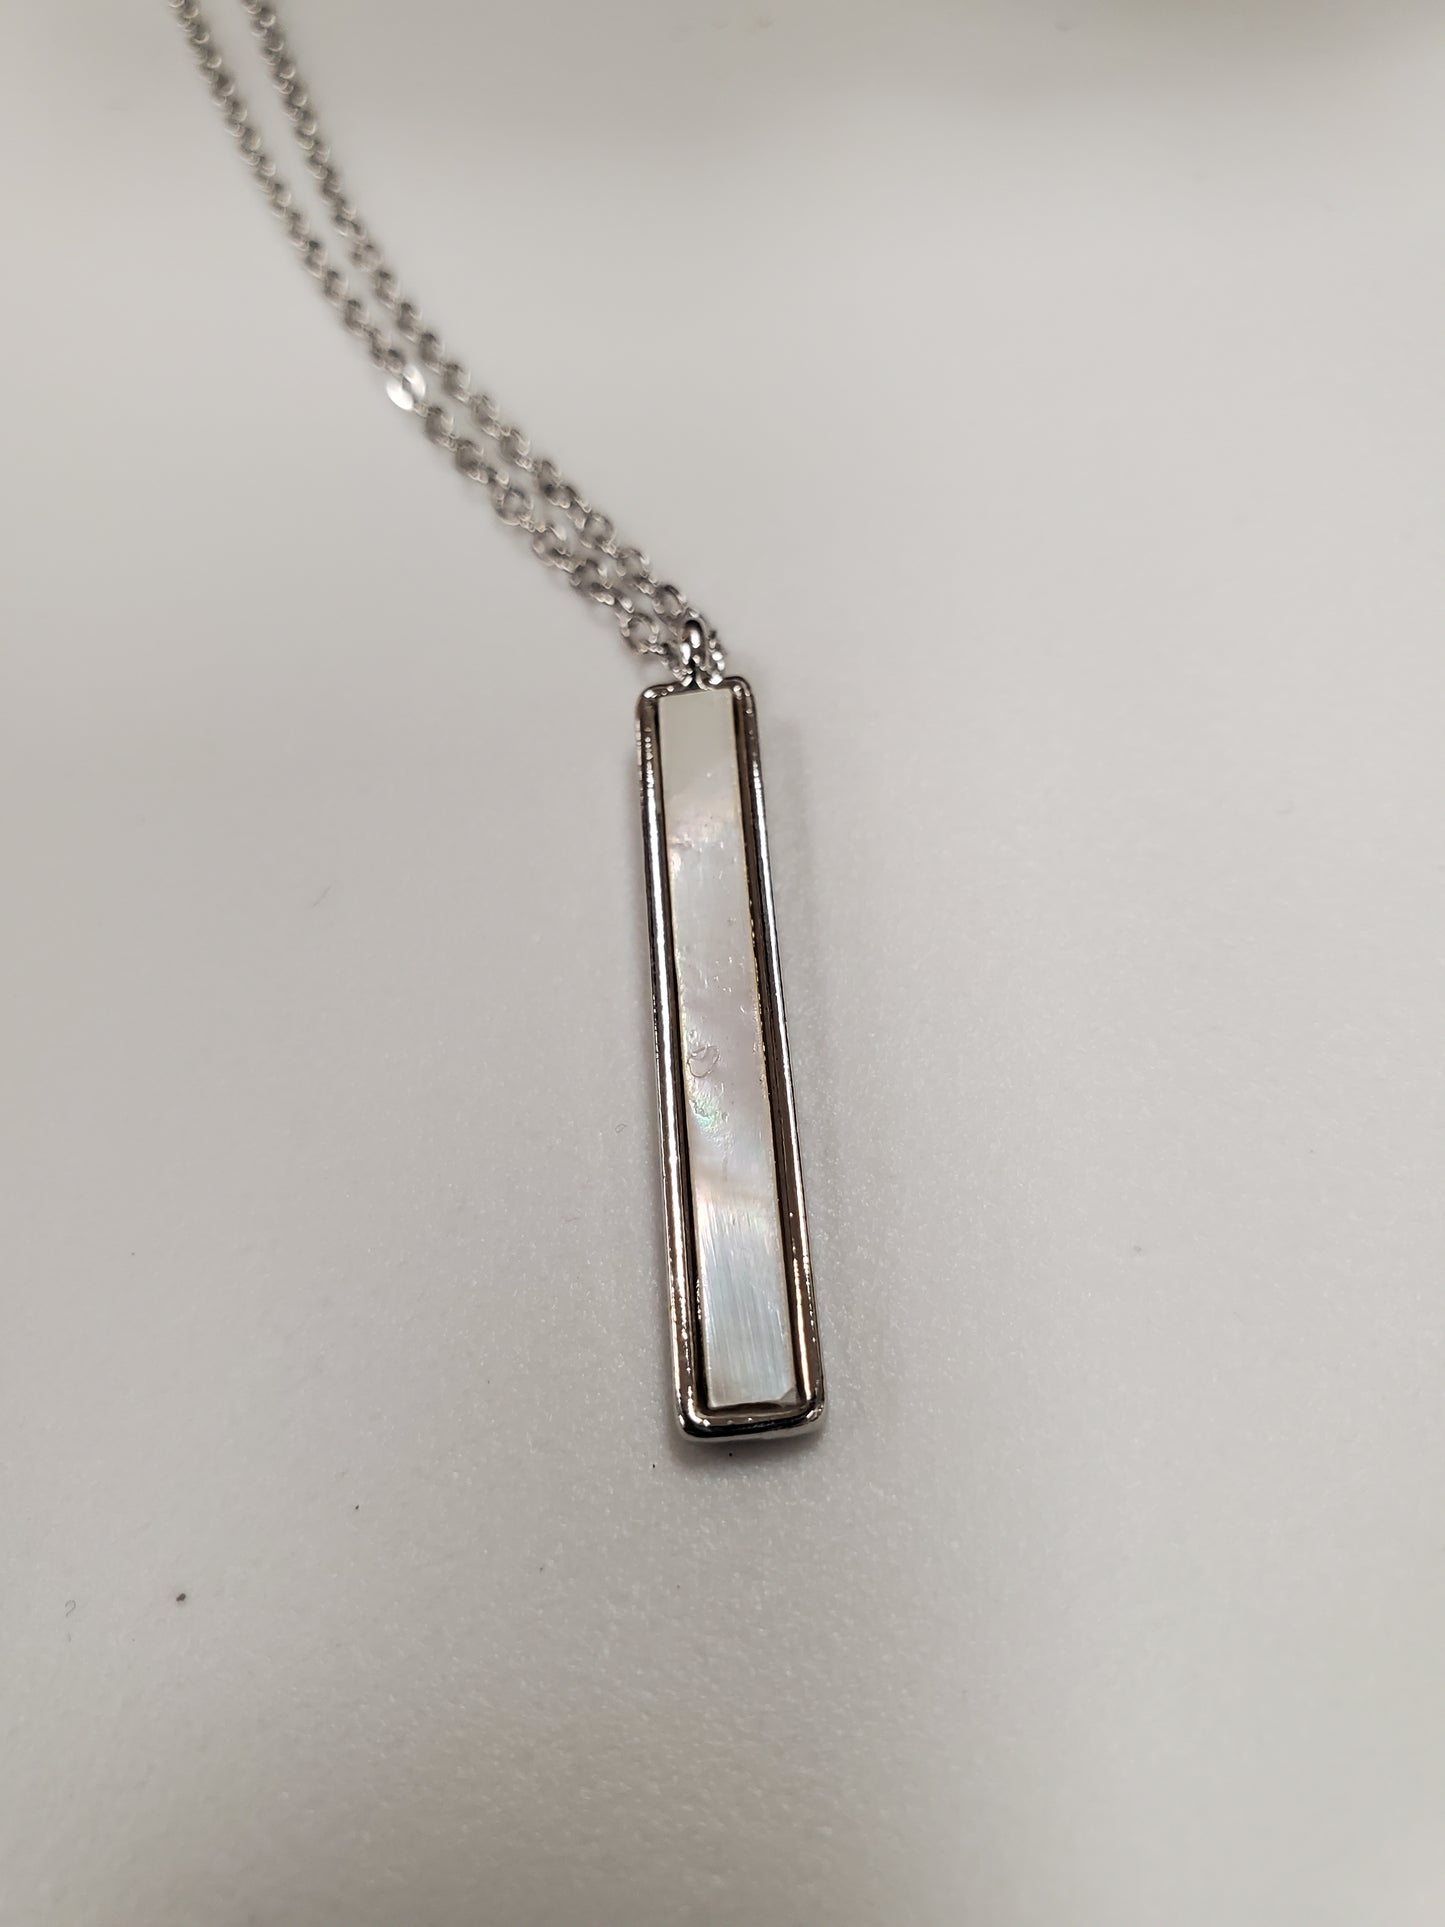 DOROTHY IRRIDESCENT BAR NECKLACE - SILVER